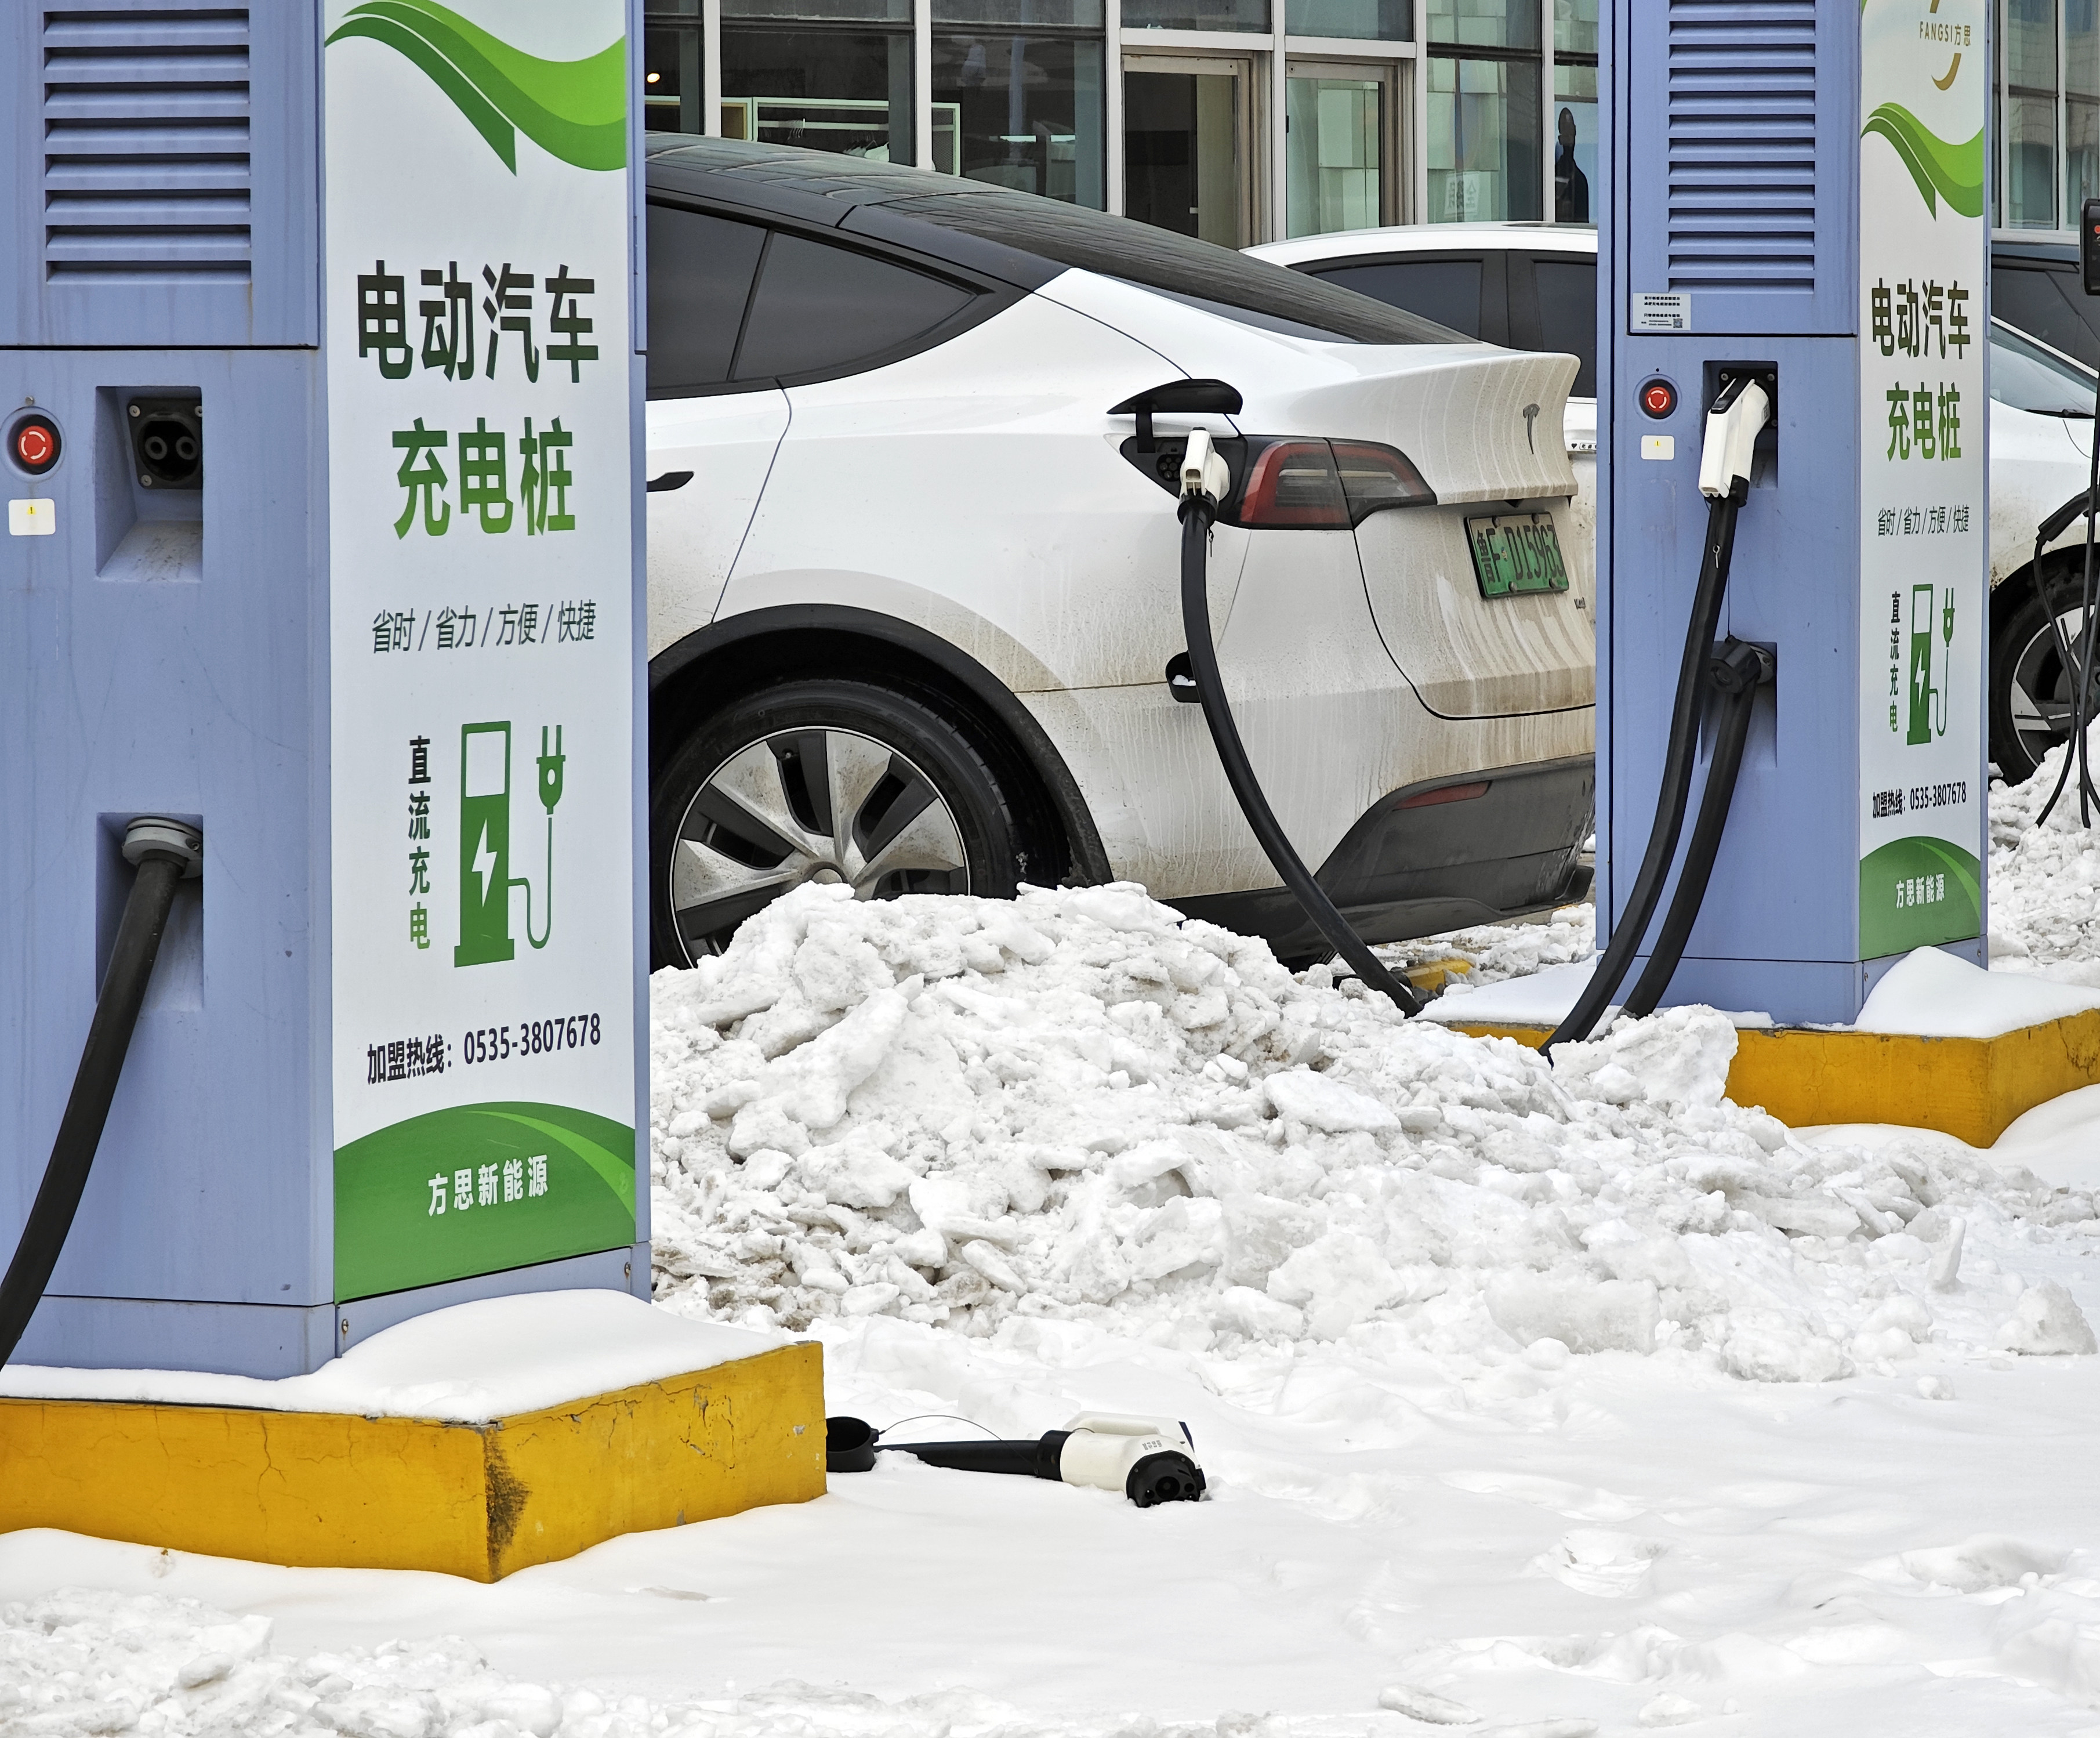 Electric vehicles at a charging station after snow in Yantai, China, on February 22, 2024.  Phot: Getty Images